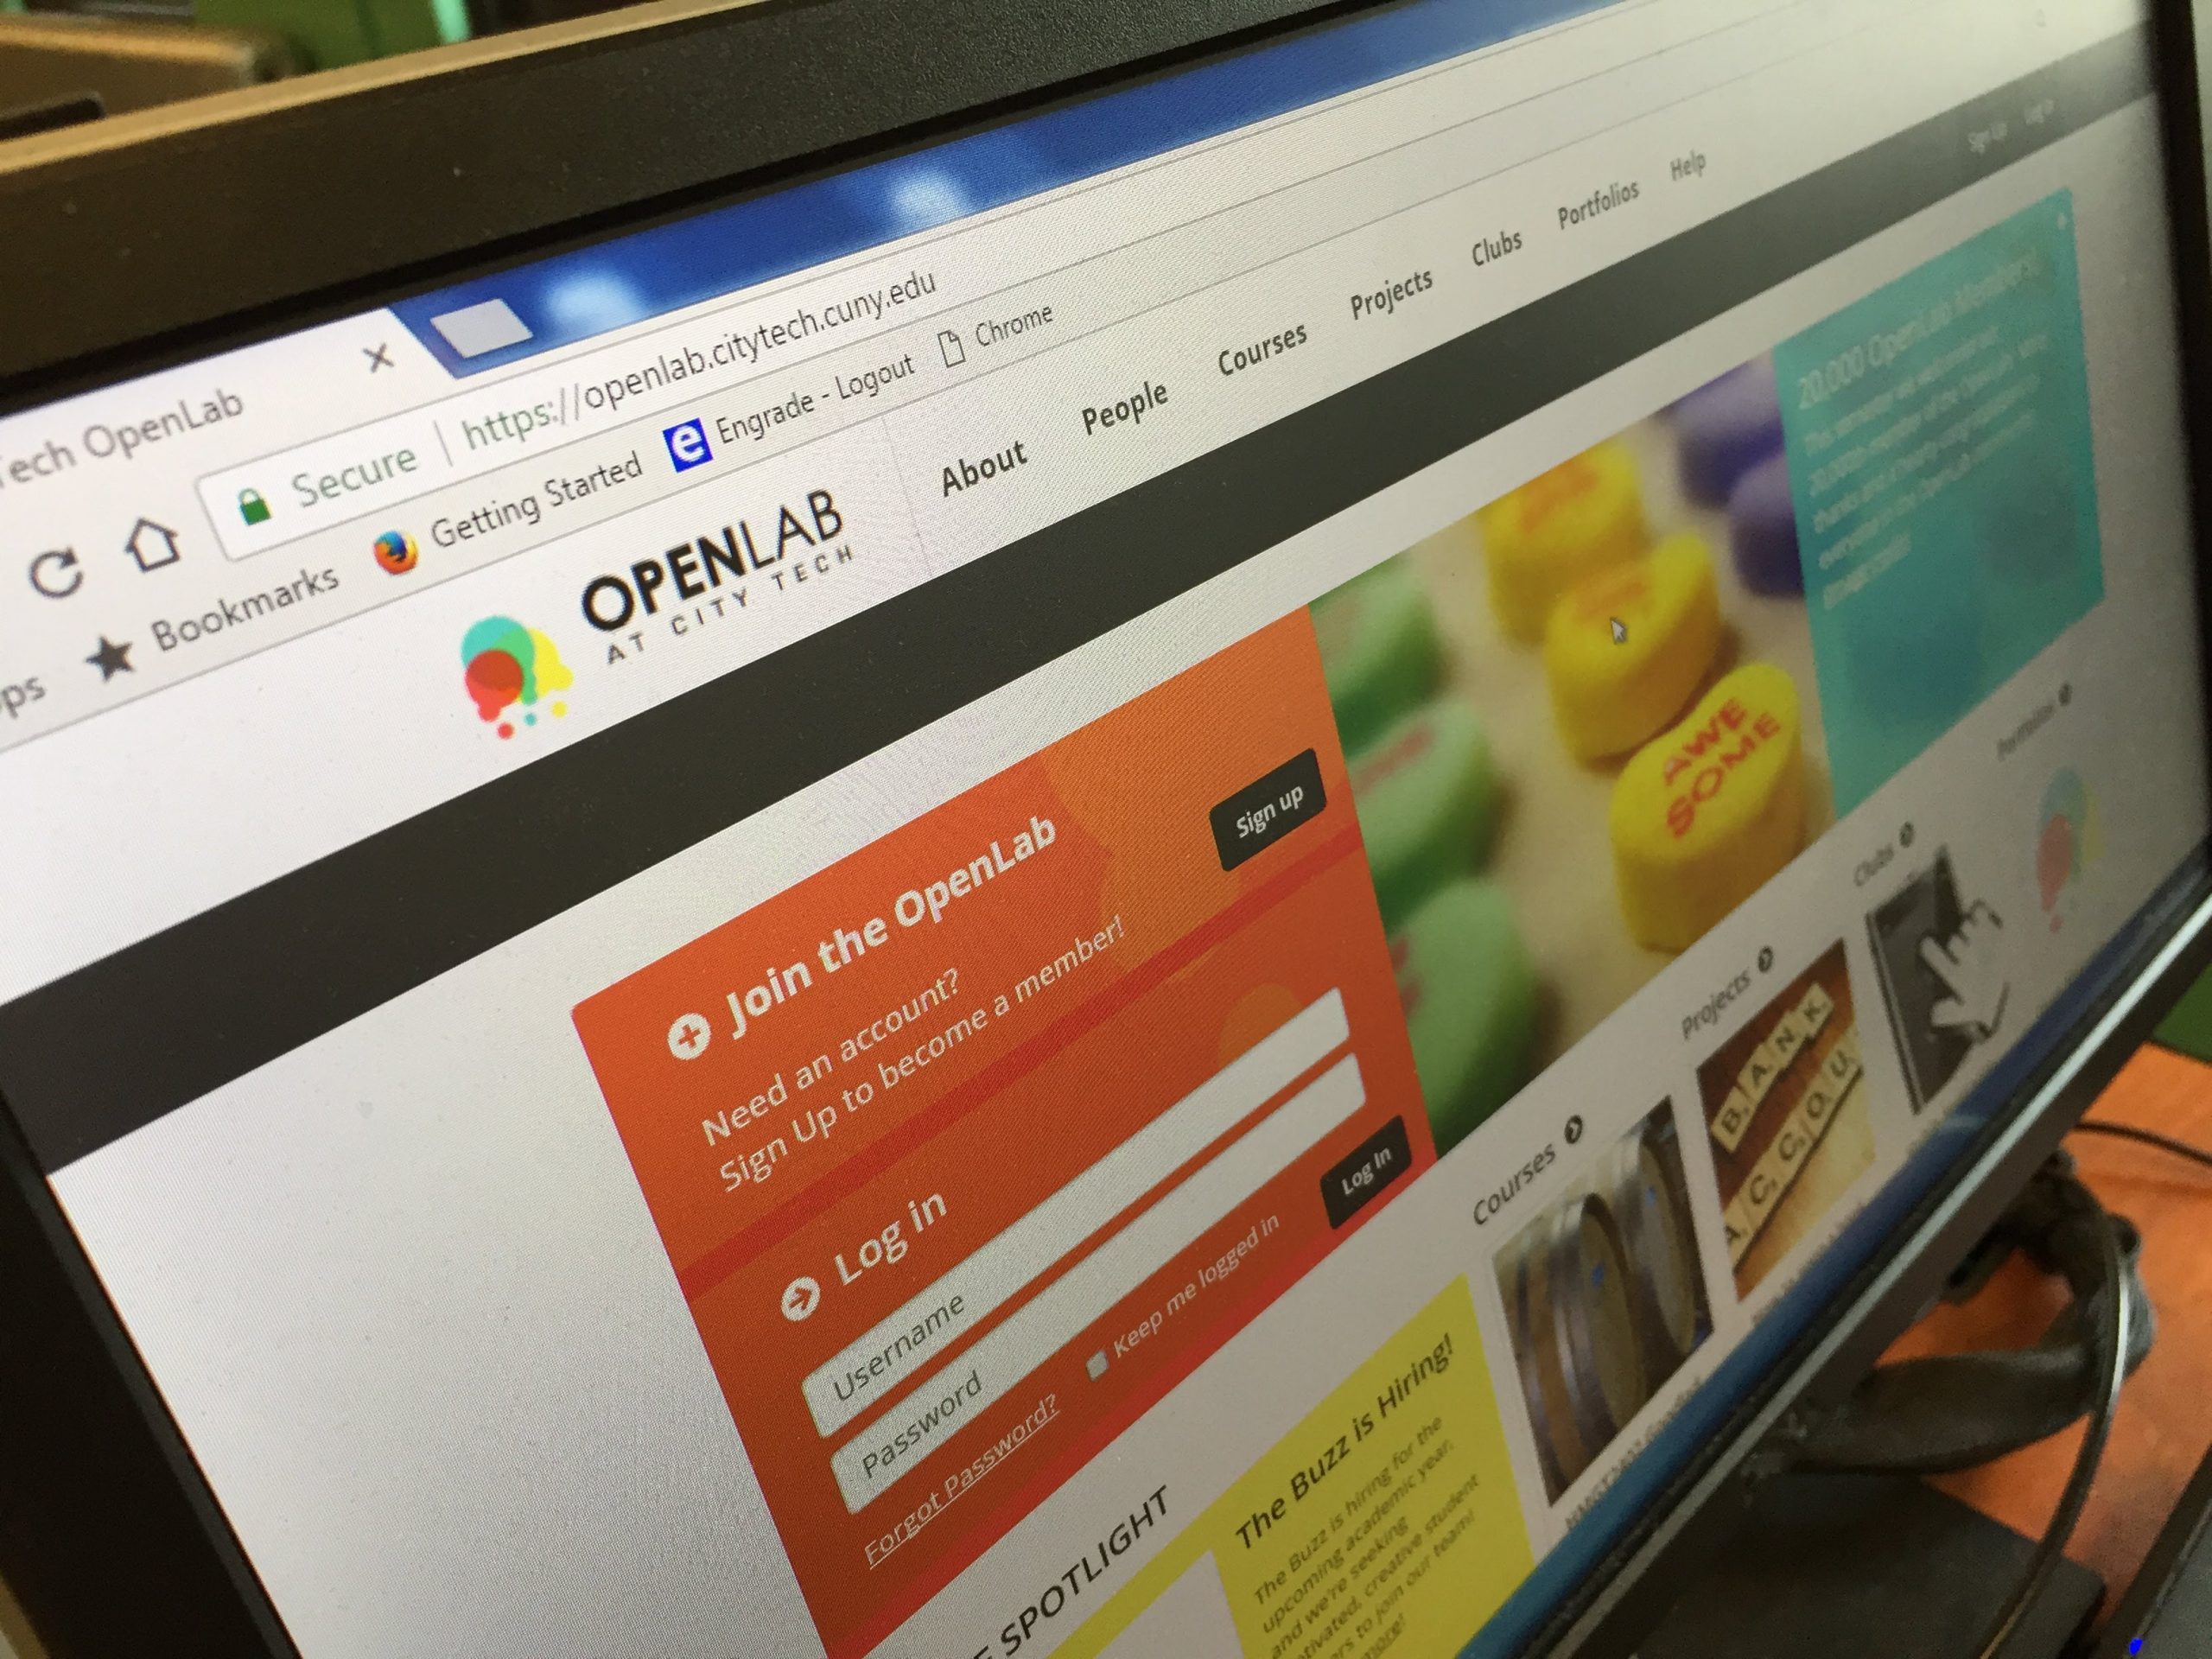 OpenLab displayed on a monitor.